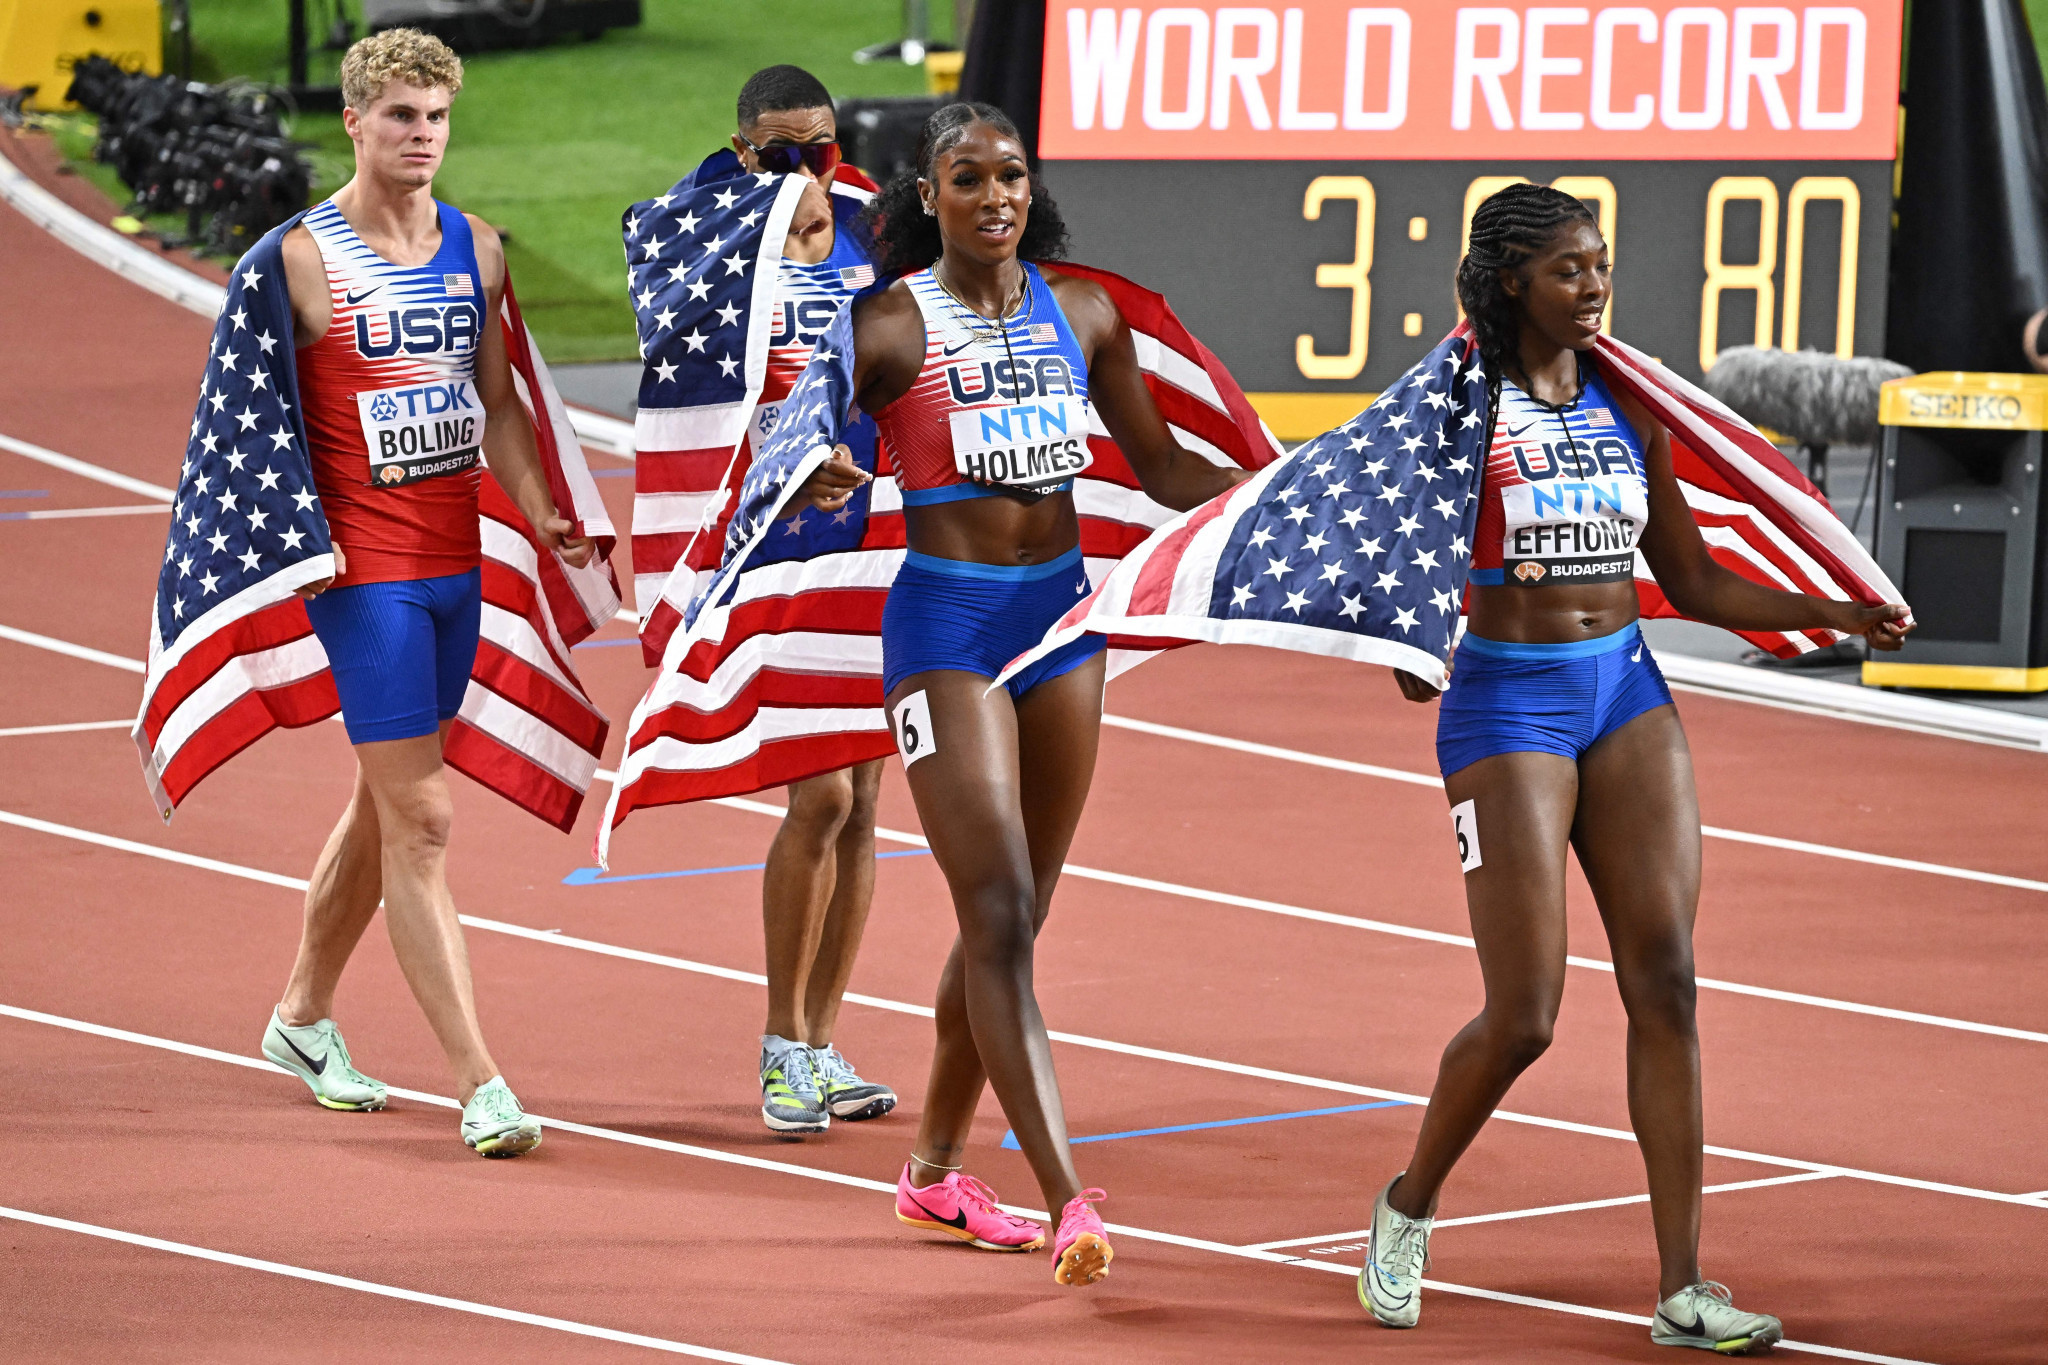 The US won mixed 4x400m relay gold in a world record time of 3min 8.80sec after The Netherlands' Femke Bol stumbled in a battle for gold with Alexis Holmes, second right ©Getty Images